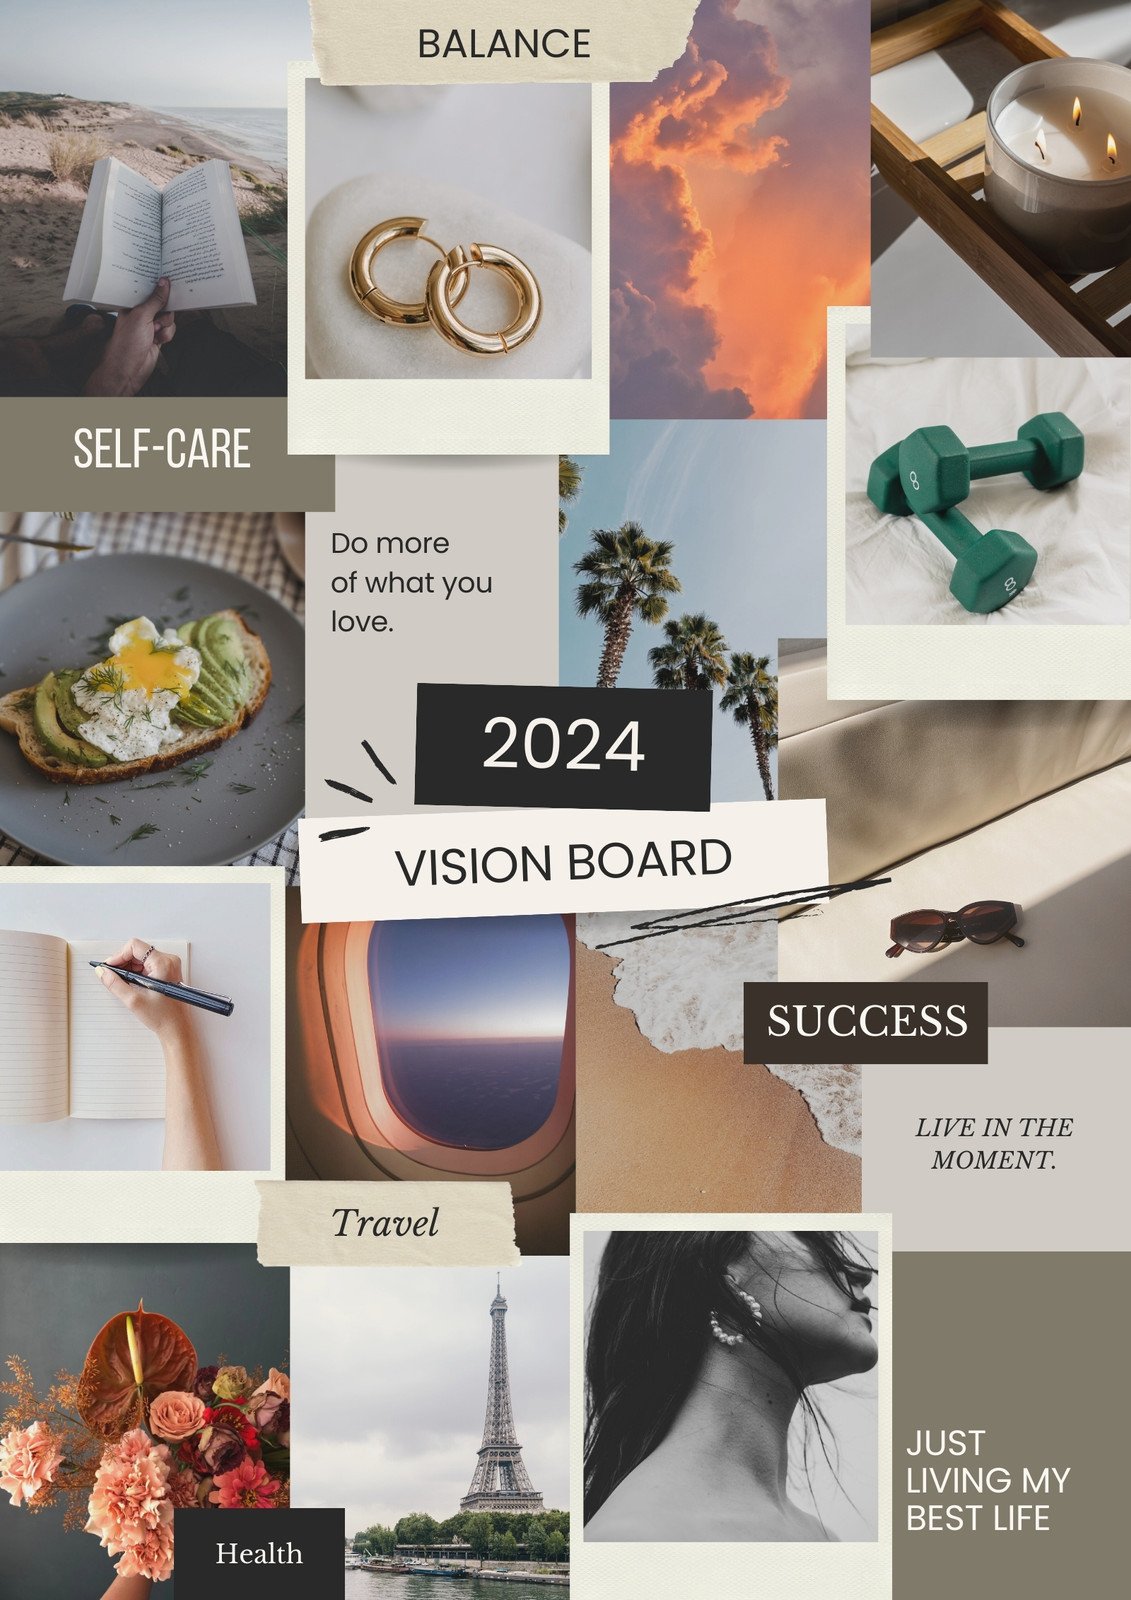 Canva Brown Aesthetic Photo Collage 2024 Vision Board Poster RI0md6l9DhU 